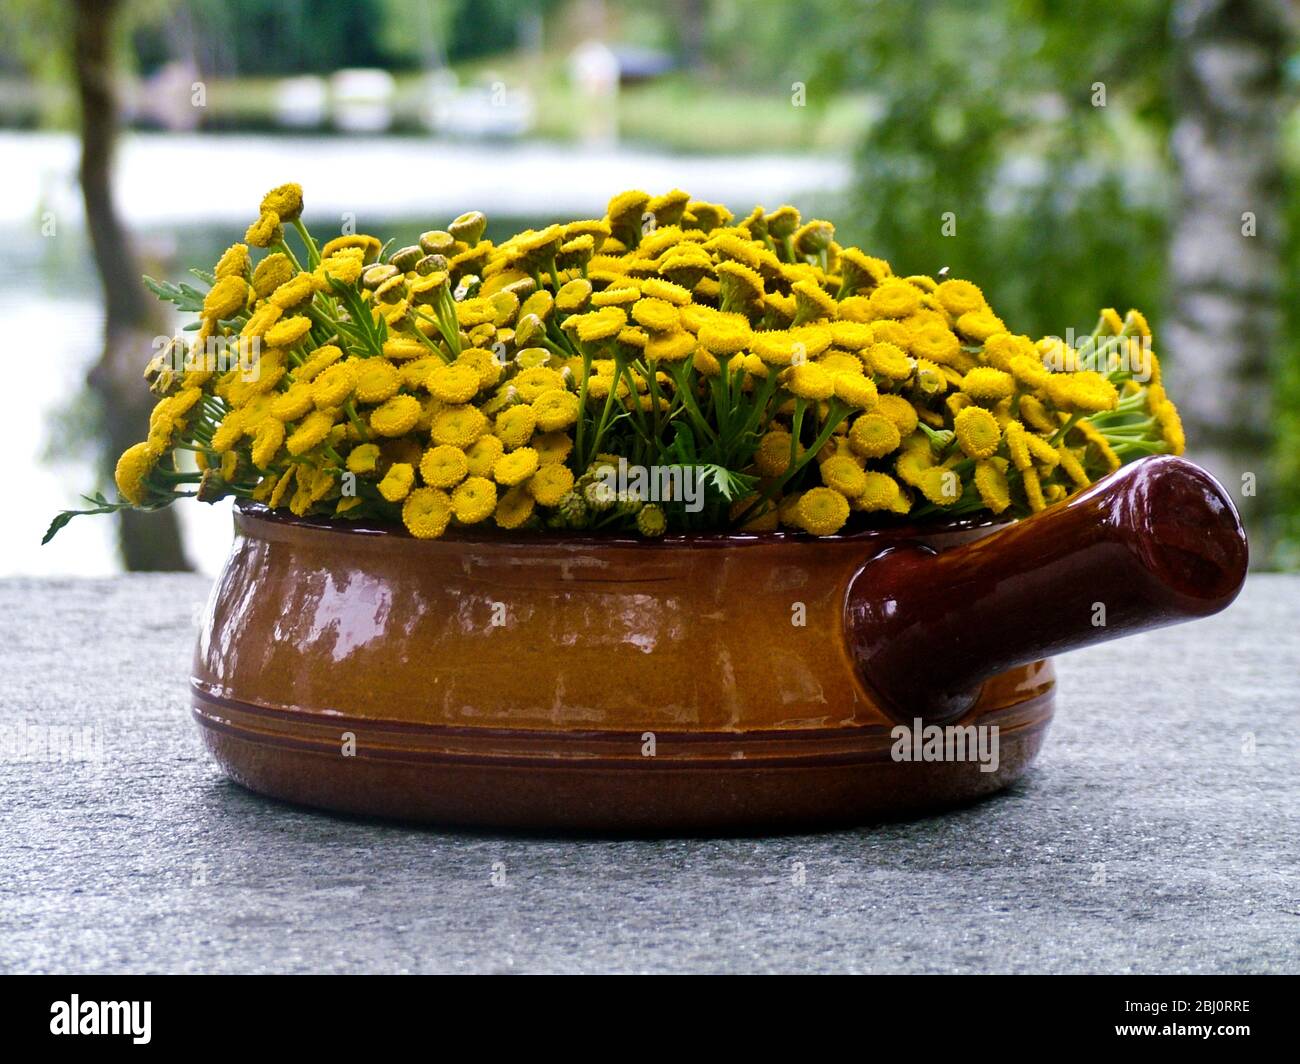 Tansy (Tanacetum vulgare) cut short and arranged in terracotta caserole dish on granite table by lake. Known as renfana in Sweden it is a very popular Stock Photo